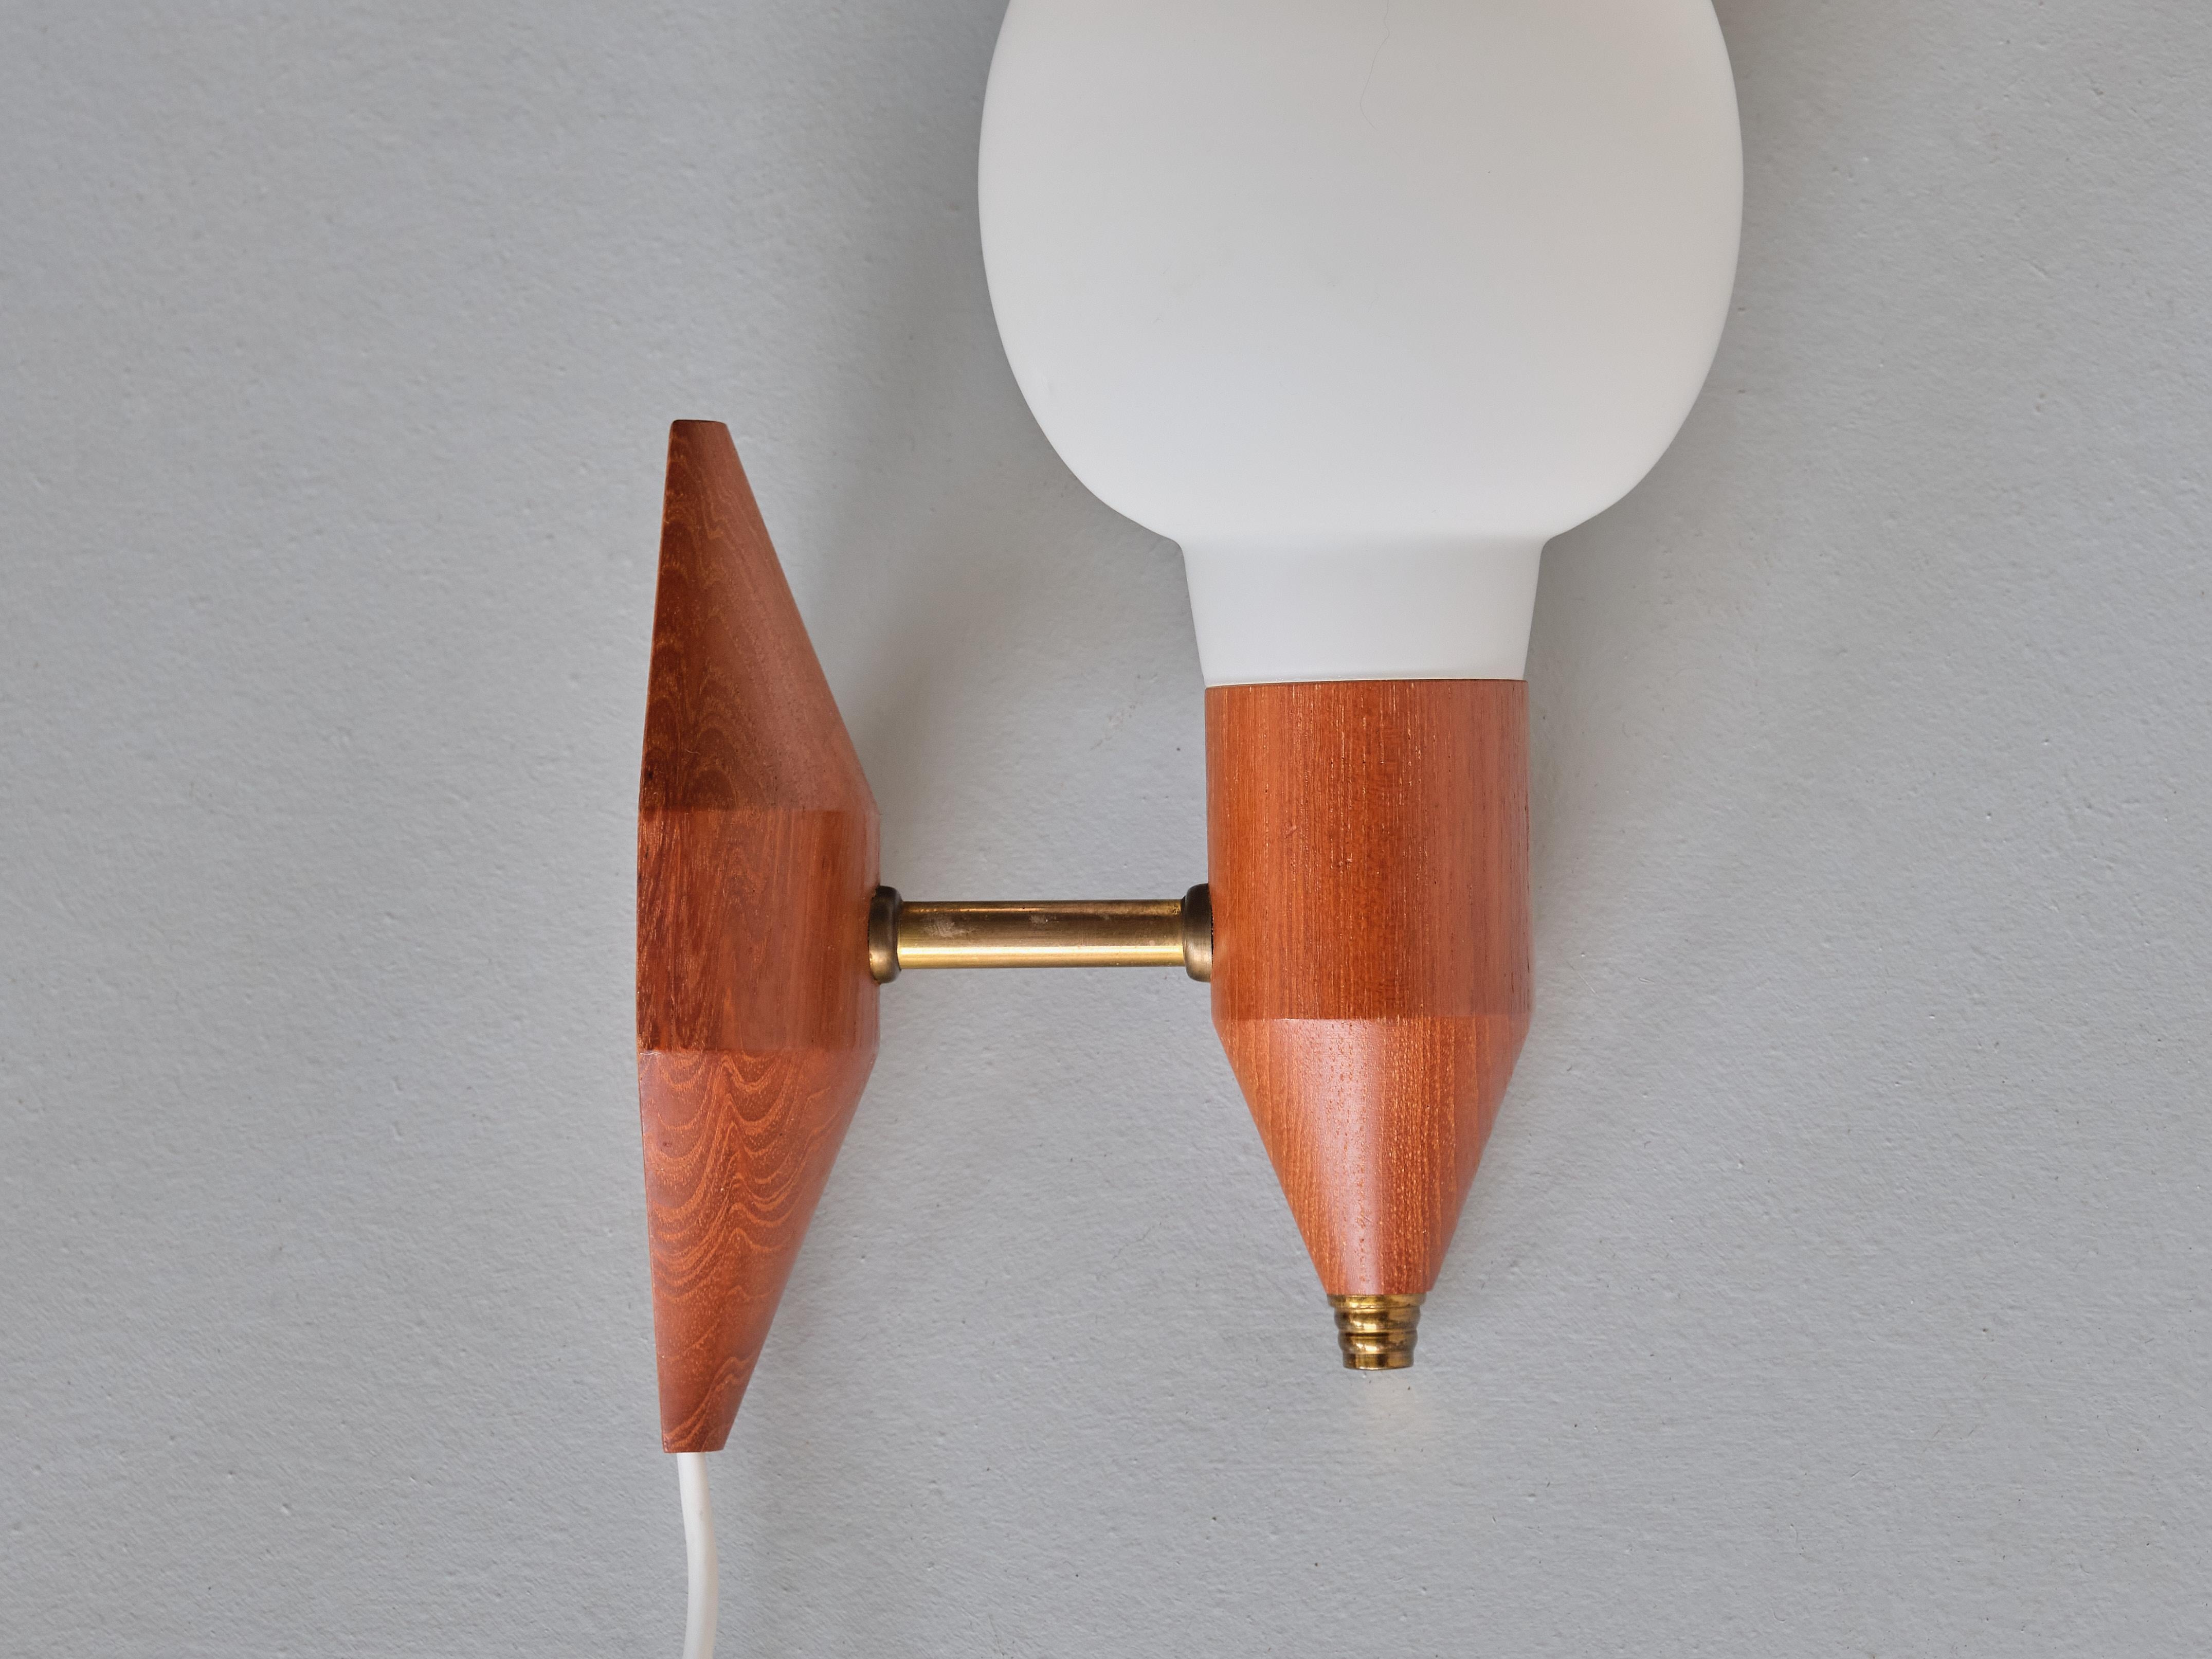 Swedish Modern Wall Lamps in Teak Wood, Brass and Opaline Glass, Sweden, 1950s For Sale 4